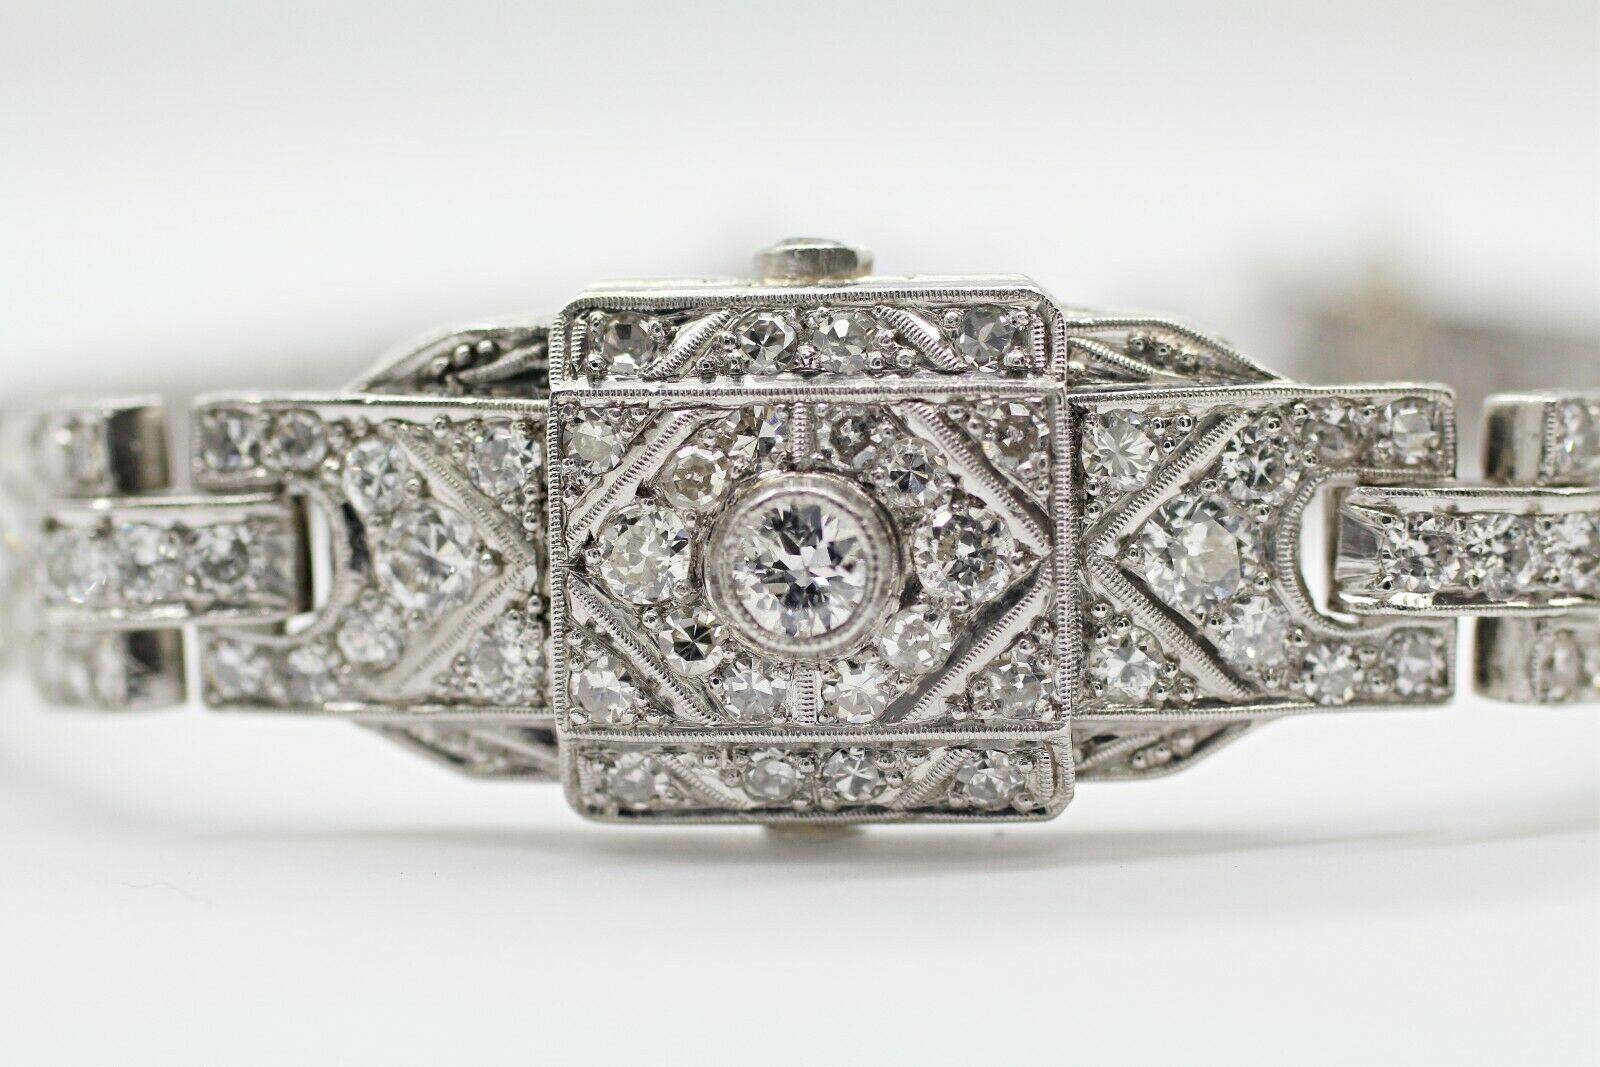  This beautiful Art-deco diamond bracelet was a watch converted to a bracelet features 151 pcs of round cut diamond in approximately 4.00 carat total weight, G color and SI2 in clarity. This bracelet crafted in 10% iridium platinum band.